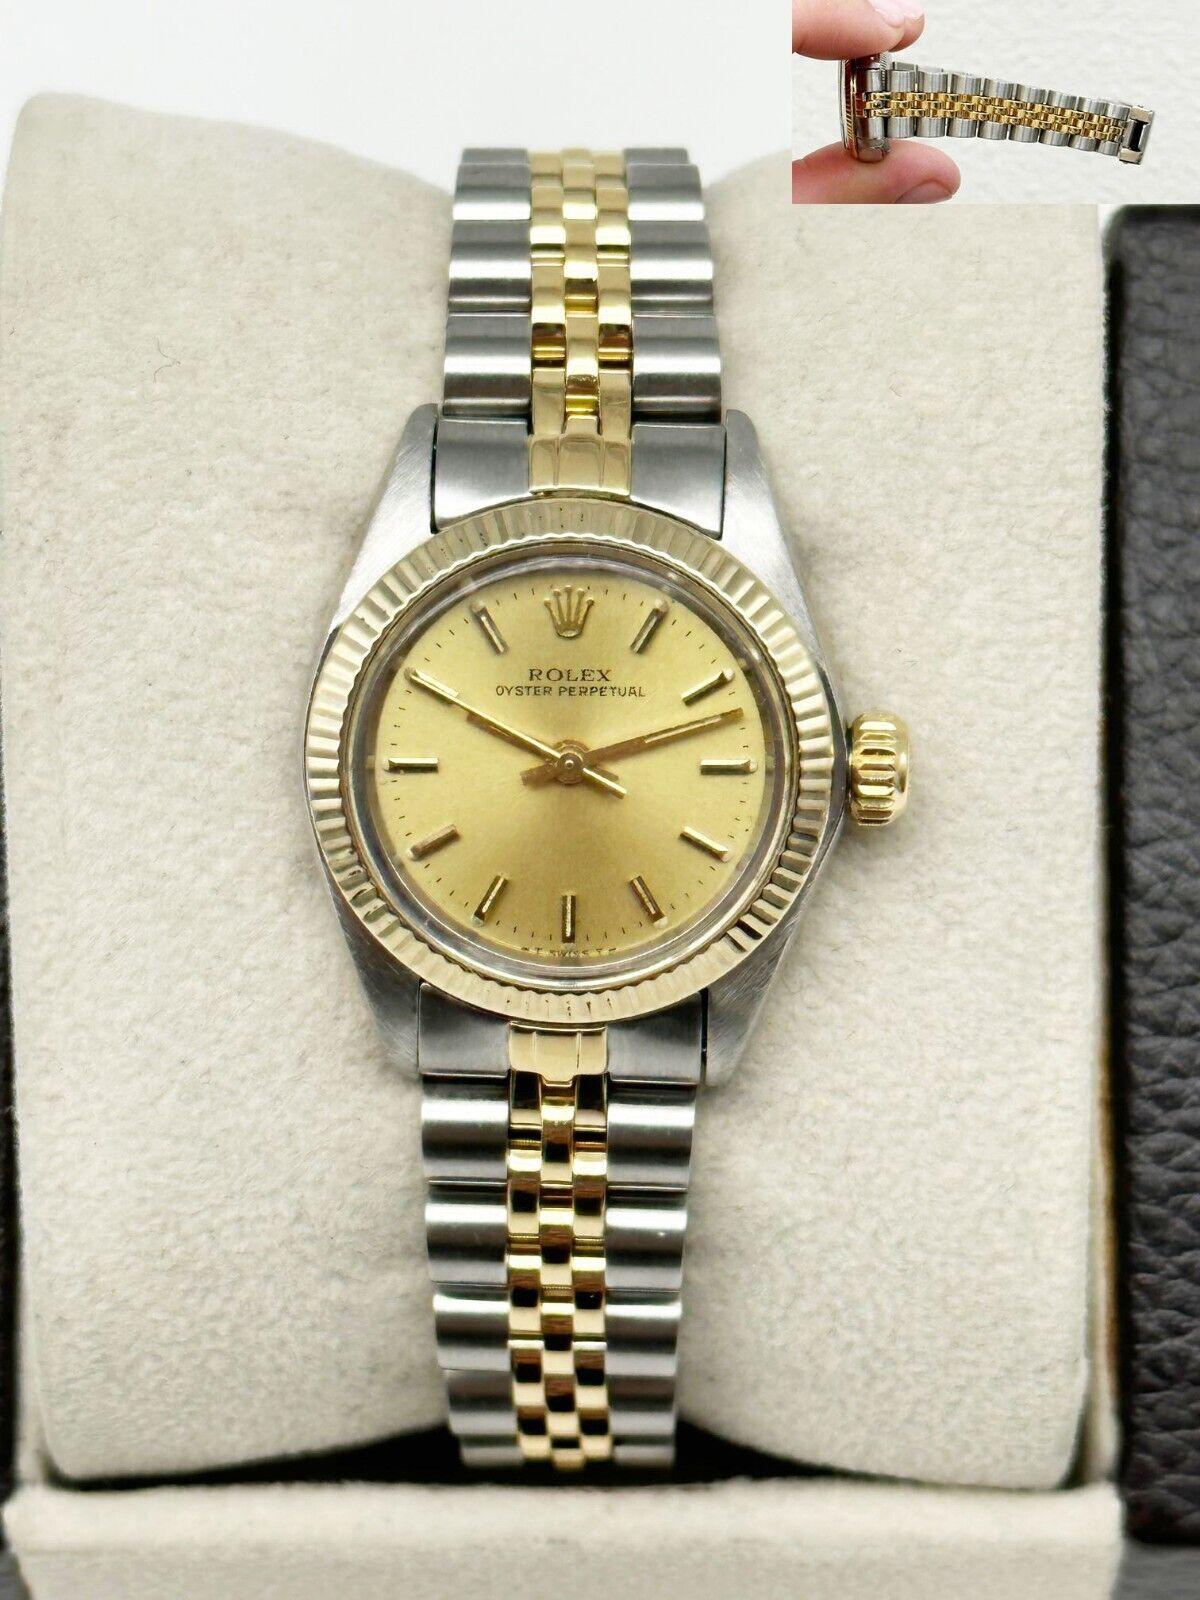 Style Number: 6719

 

Serial: 7234***


Year: 1982

 

Model: Ladies Oyster Perpetual

 

Case Material: Stainless Steel

 

Band: 18K Yellow Gold & Stainless Steel 

 

Bezel: 18K Yellow Gold

 

Dial: Champagne

 

Face: Acrylic

 

Case Size: